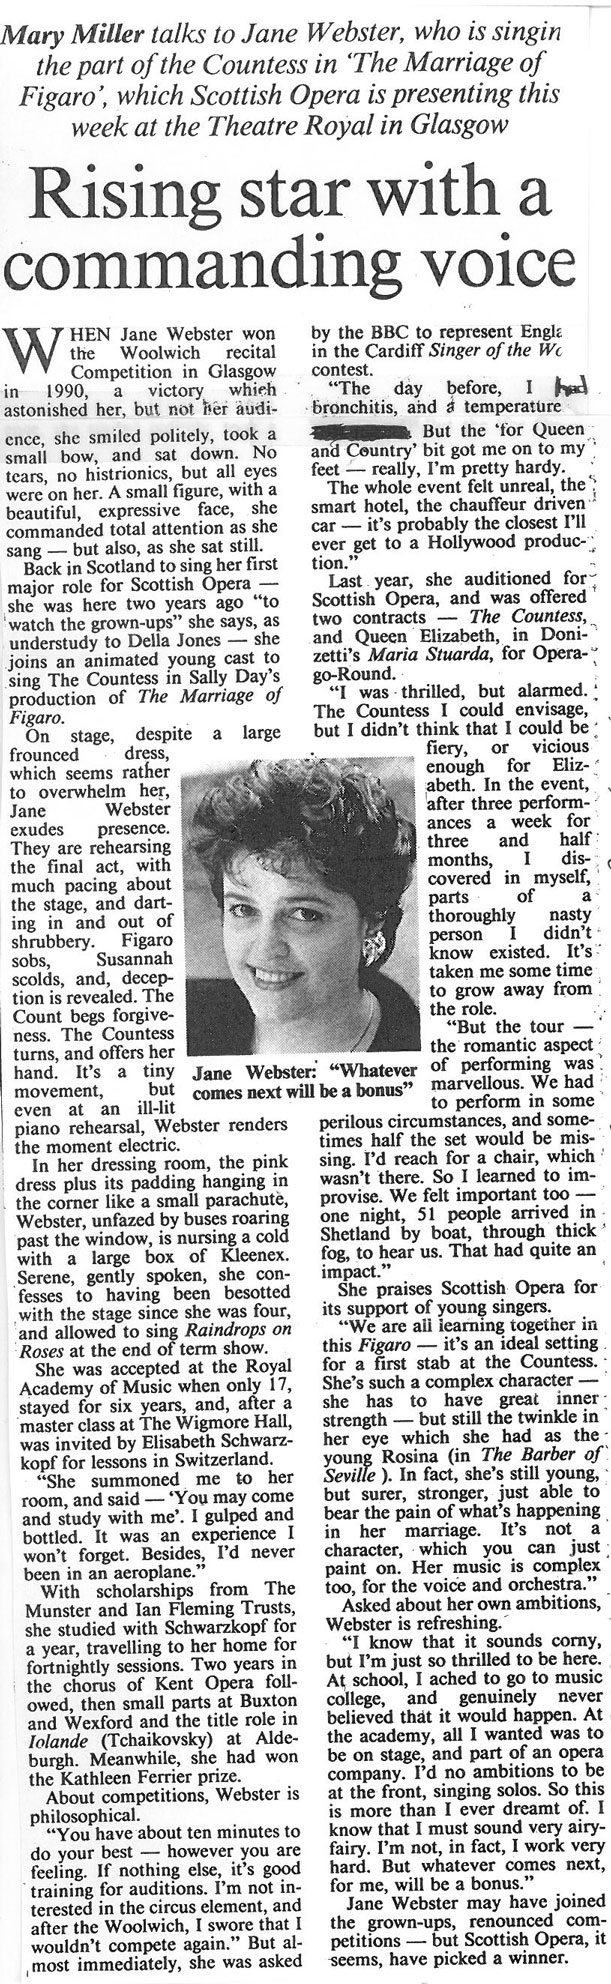 Interview, 1992, The Scotsman